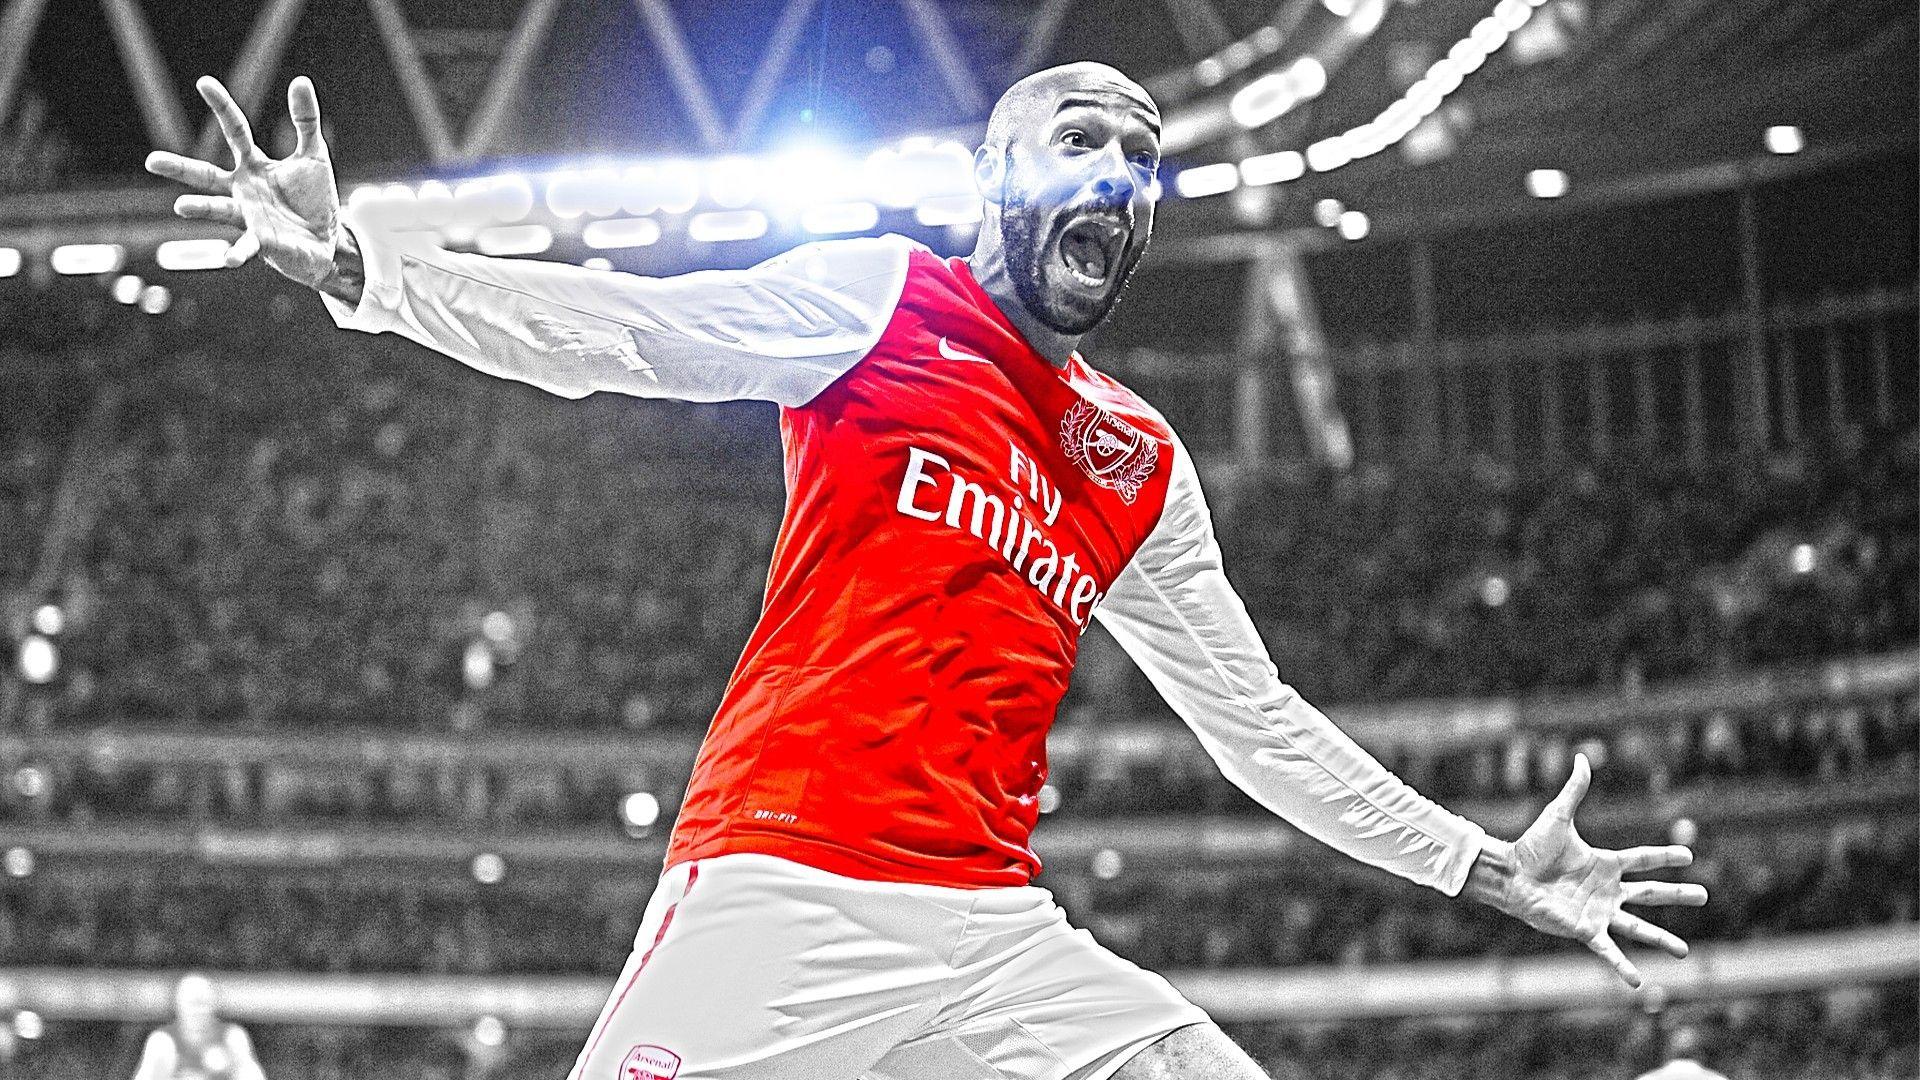 Arsenal London, Thierry Henry Wallpaper HD / Desktop and Mobile